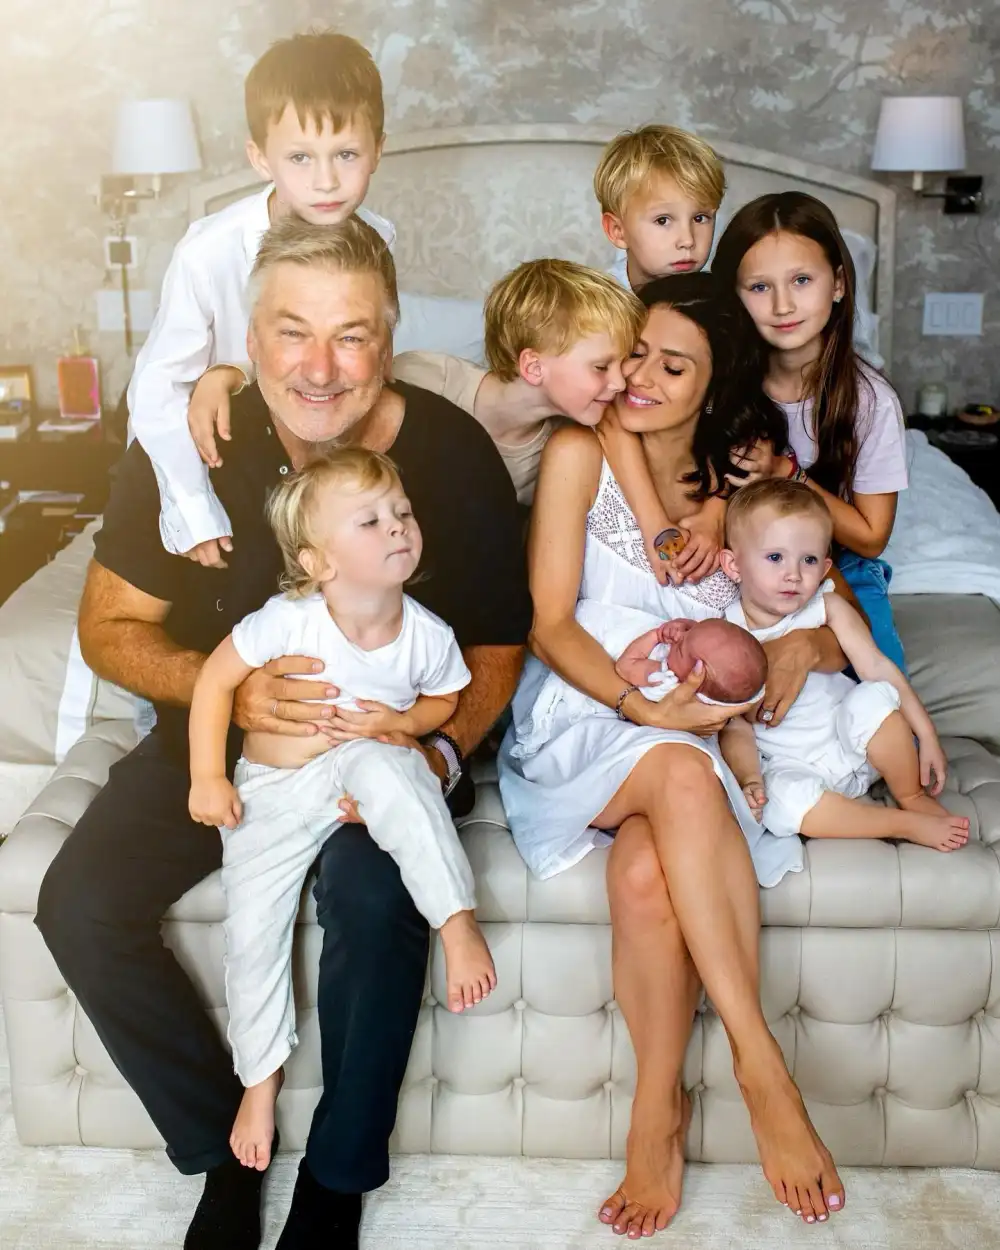 Alec Baldwin is Done Having Kids at 65: A Positive Step for Him and His Family